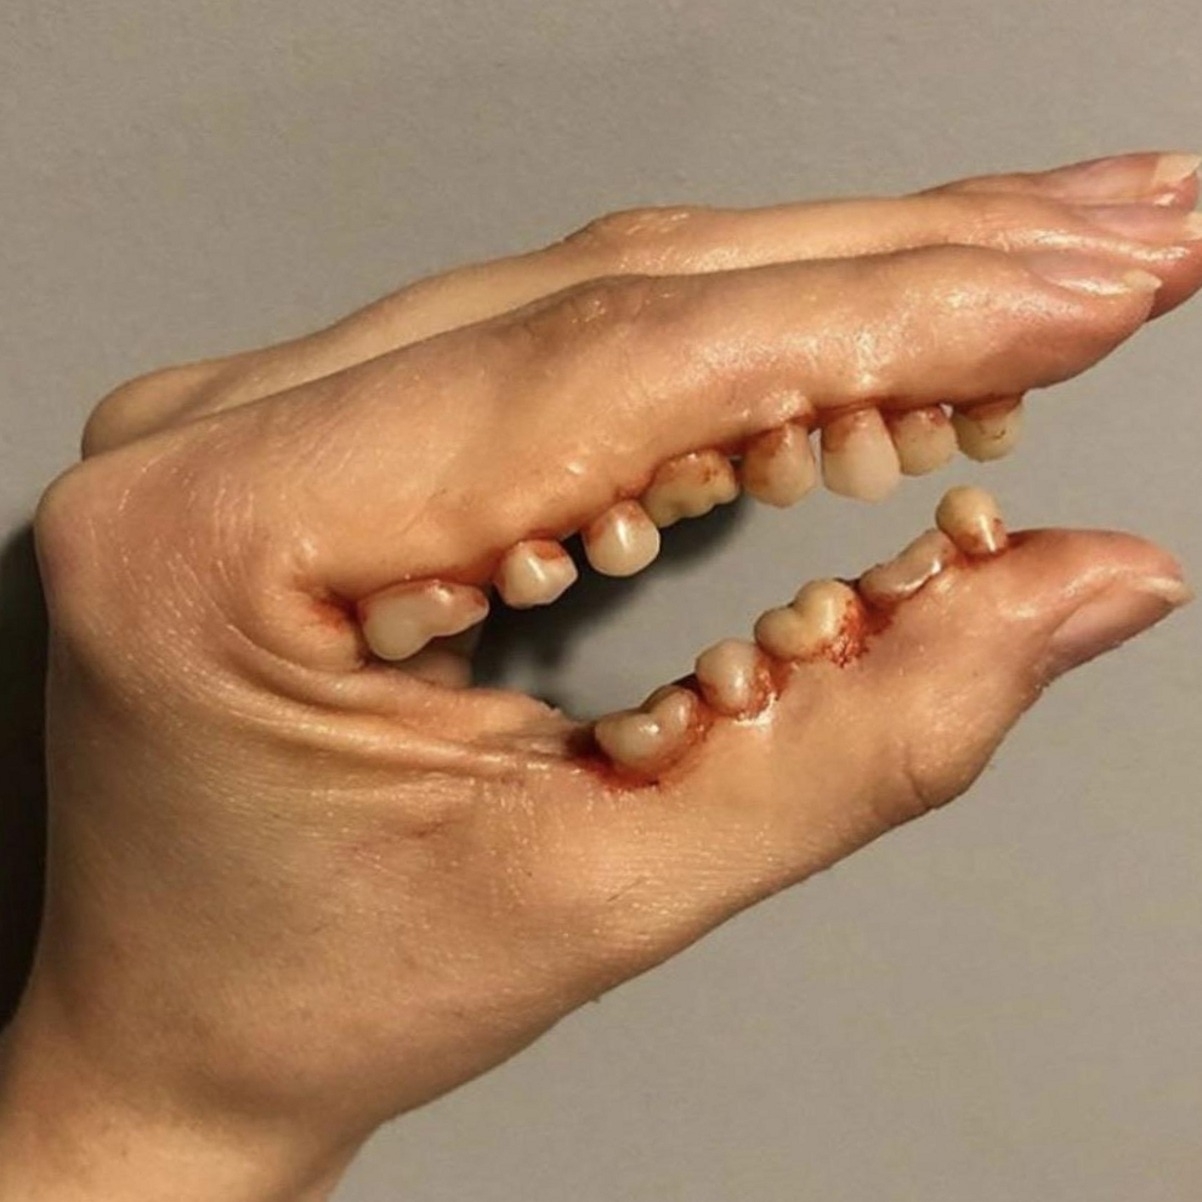 A hand with teeth glued to it